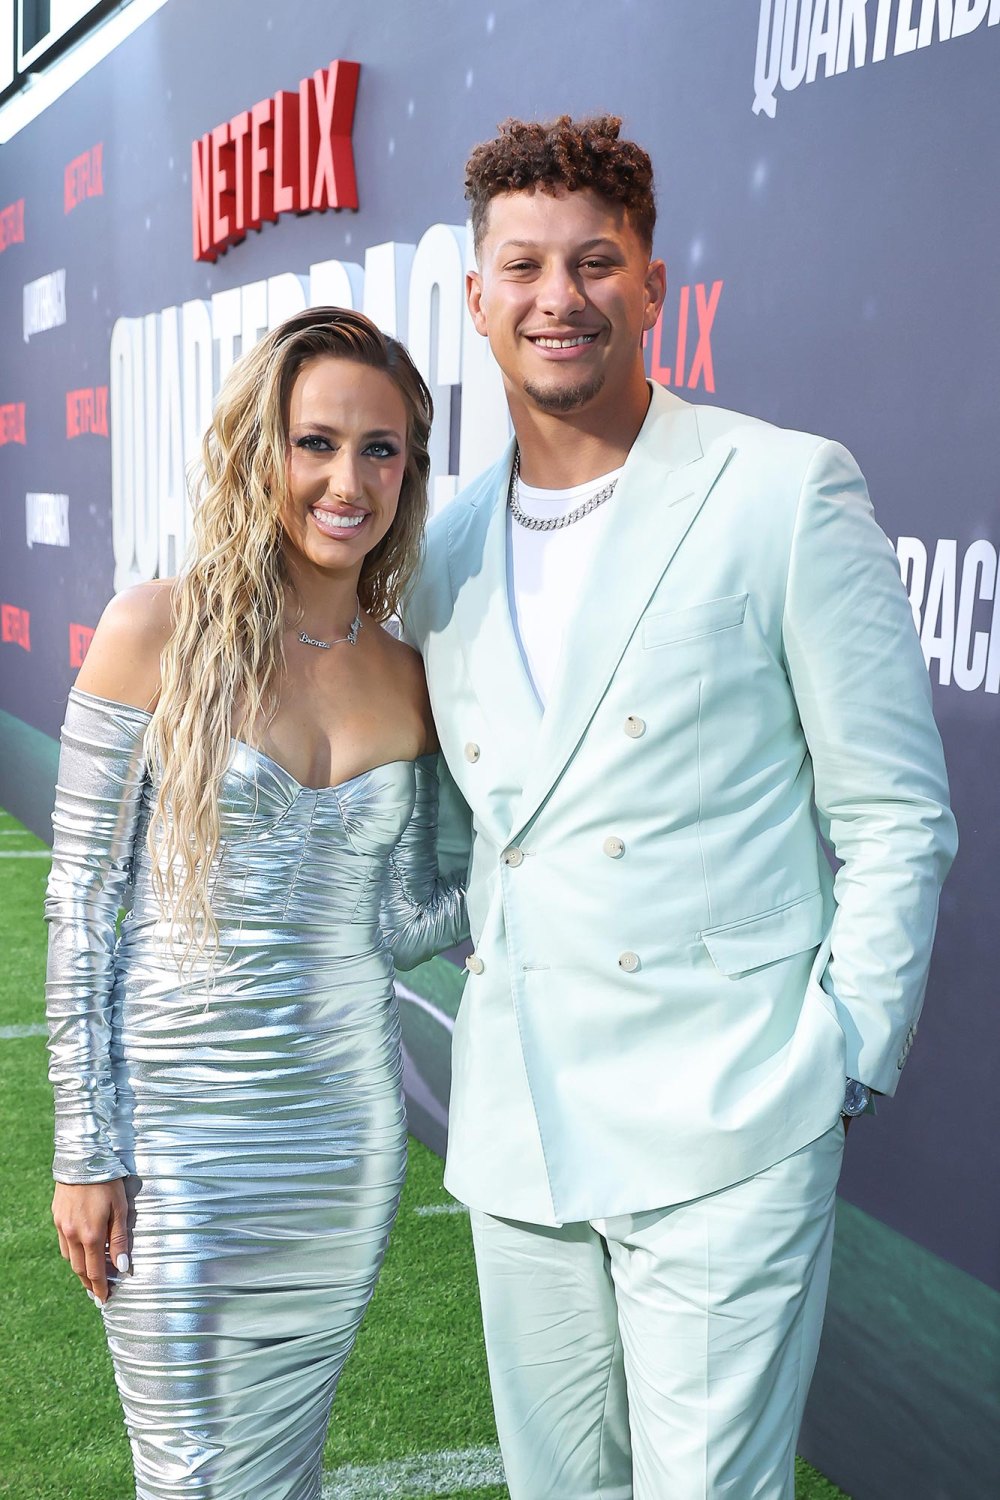 Patrick Mahomes Wears Crocs With Suit